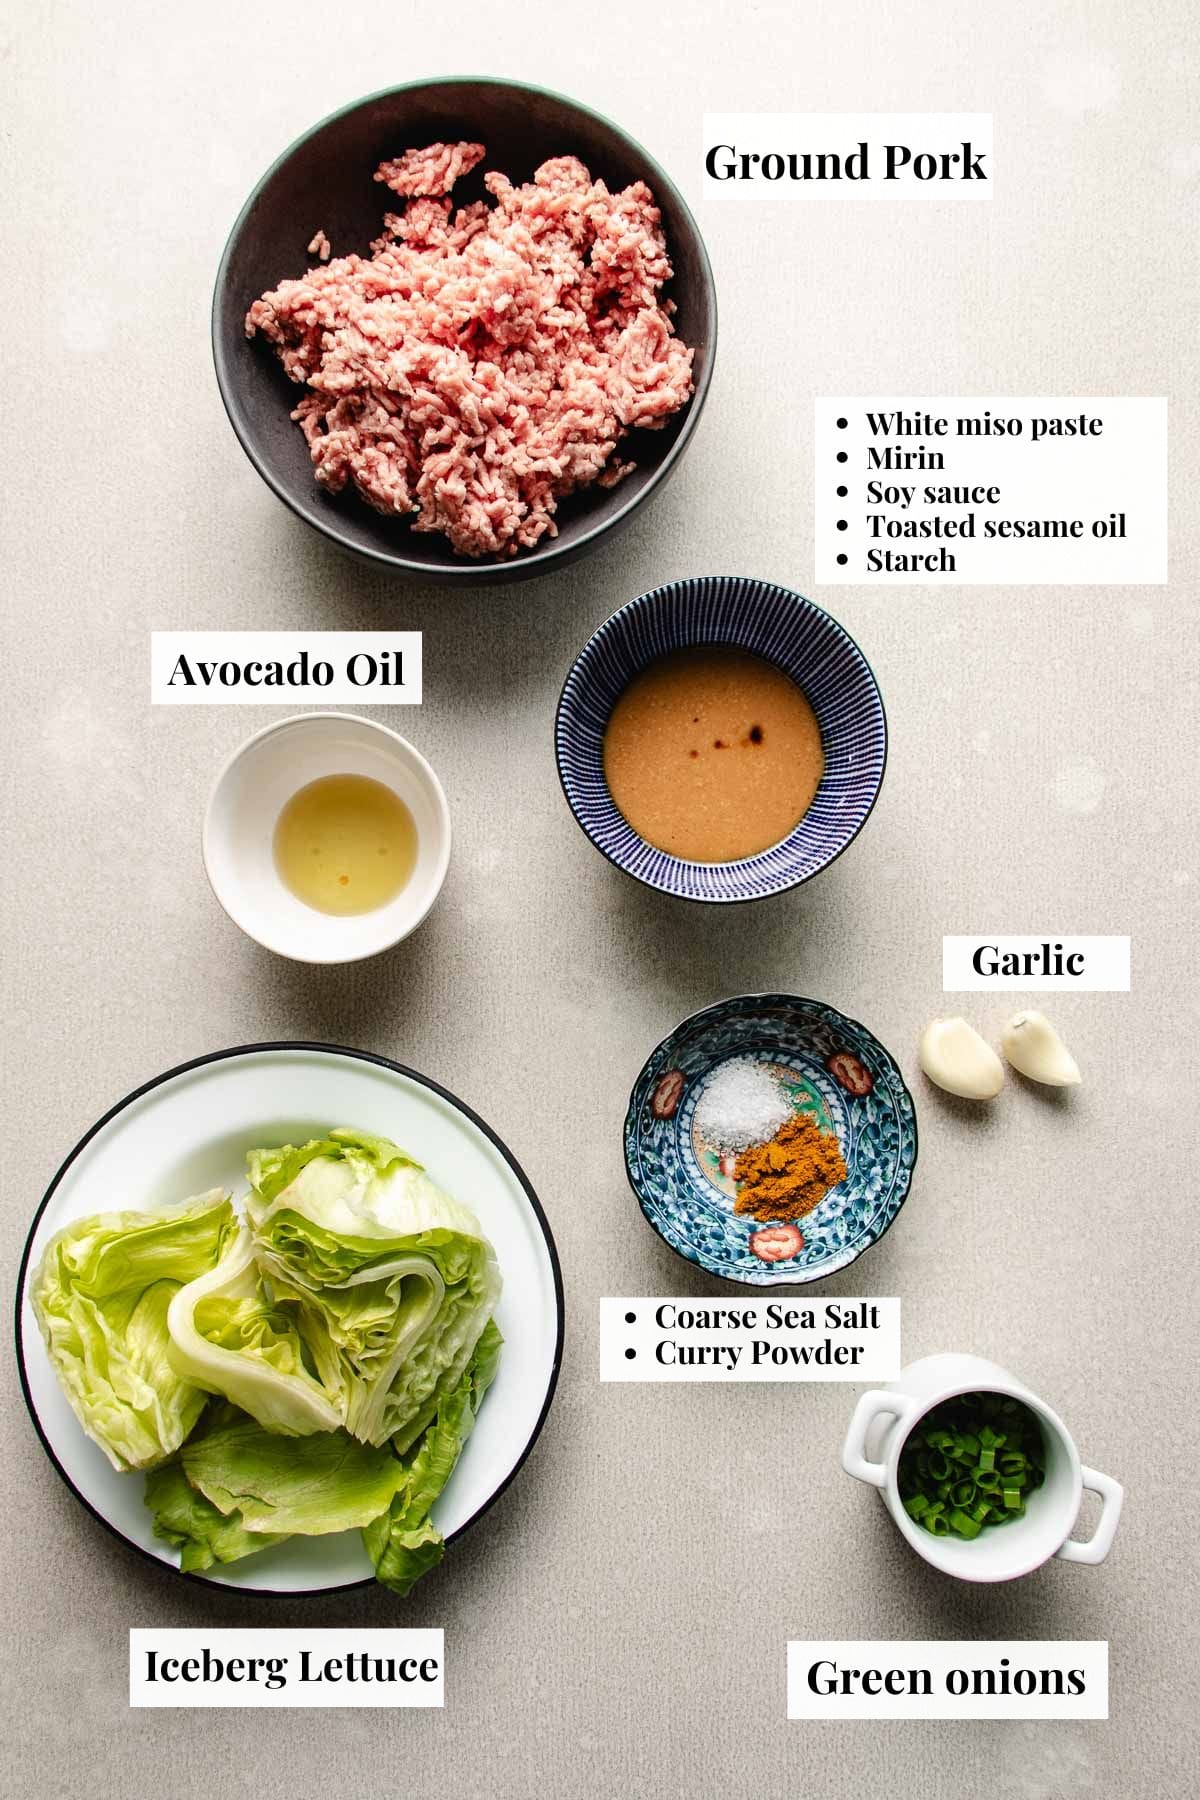 Photo shows how to season ground pork with simple ingredients.